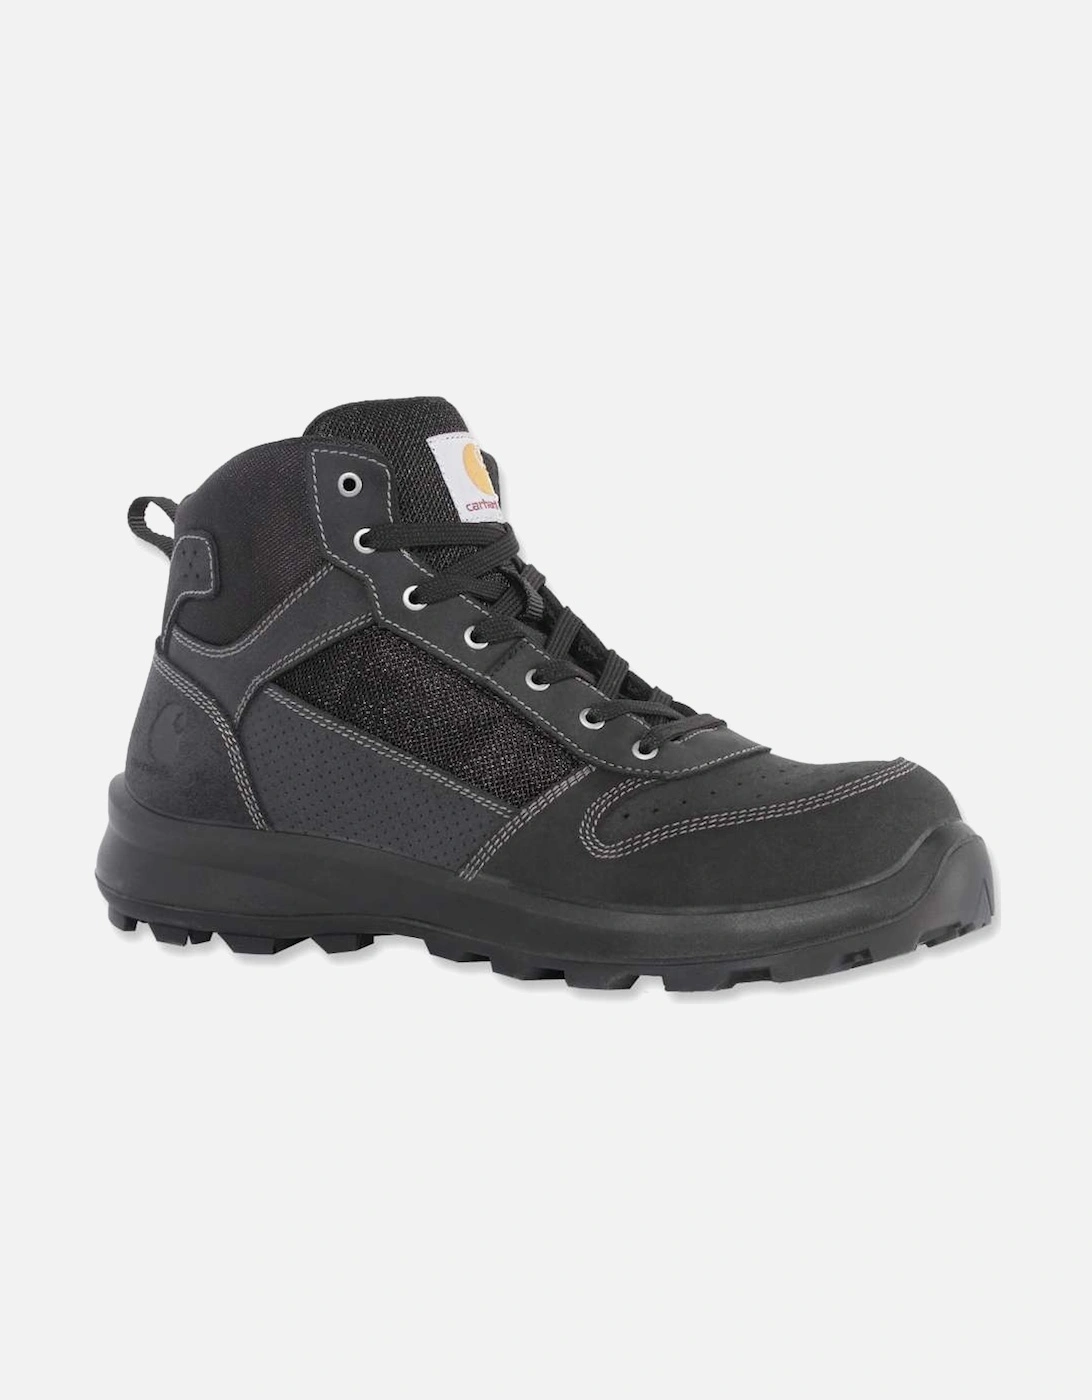 Carhartt Mens Sneaker Nubuck Leather Mid Work Safety Boots, 8 of 7